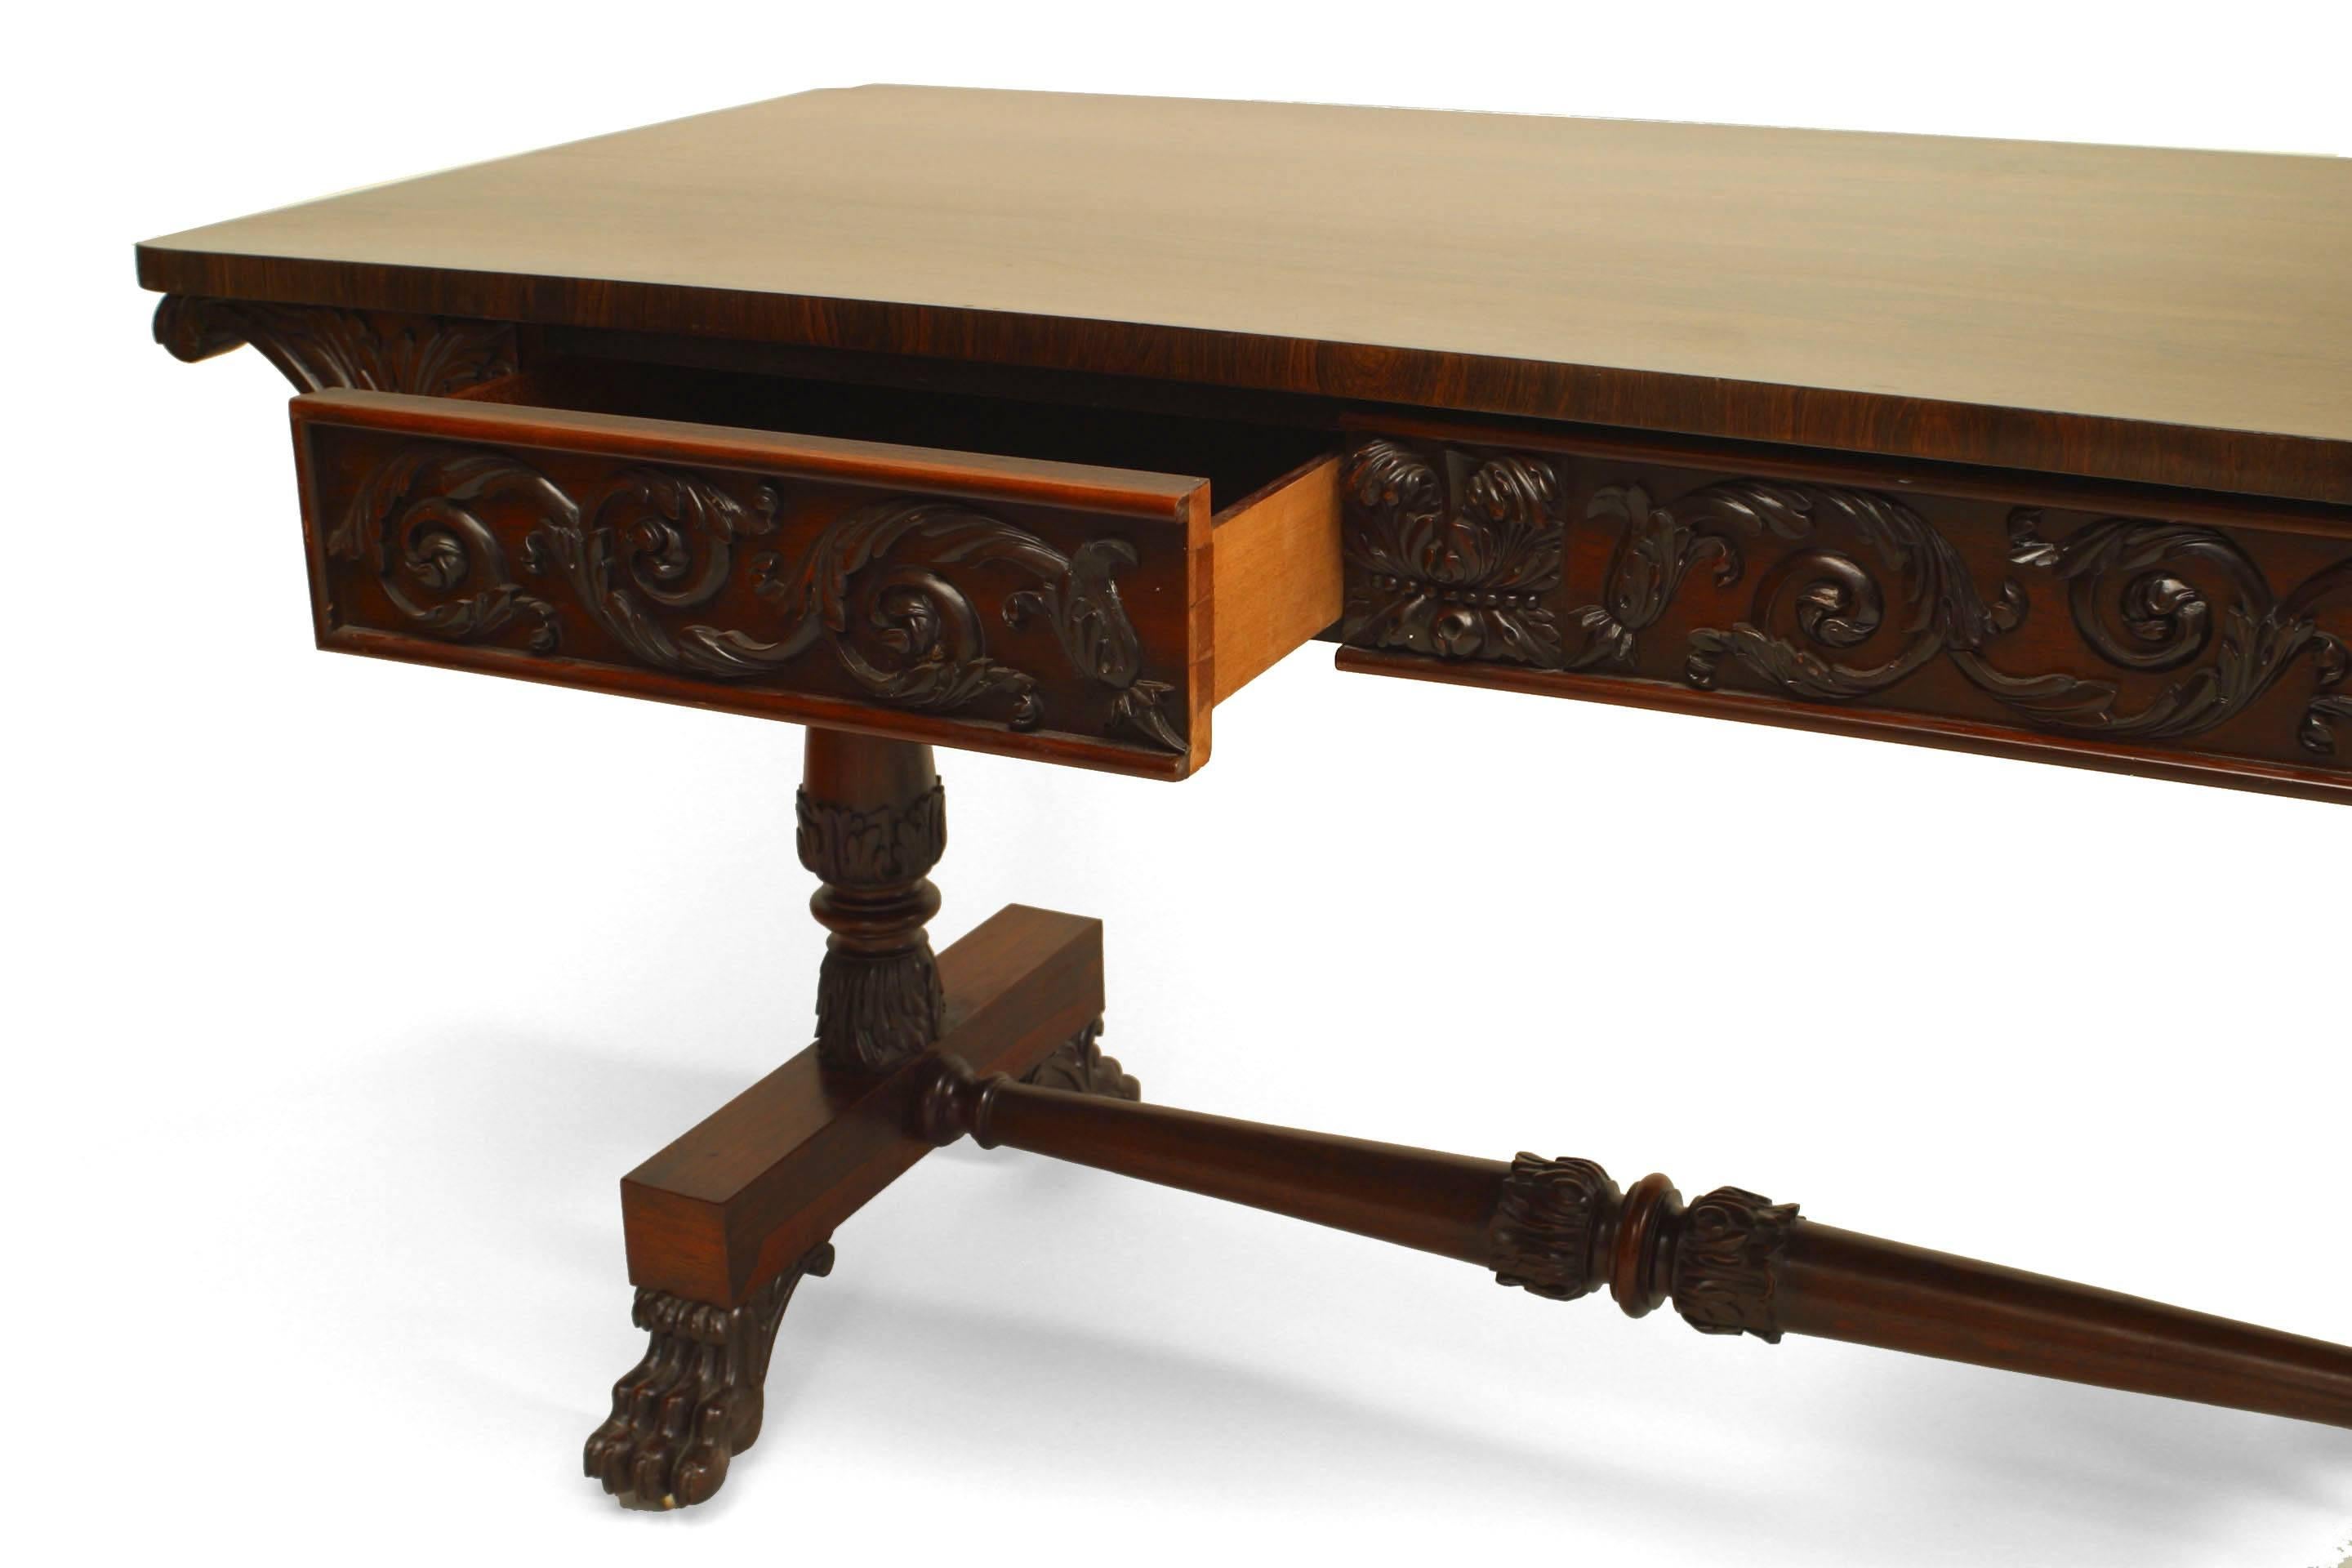 English William IV (circa 1835) rosewood davenport table desk with carved apron and supported on 2 pedestals connected with a stretcher and 2 drawers.
